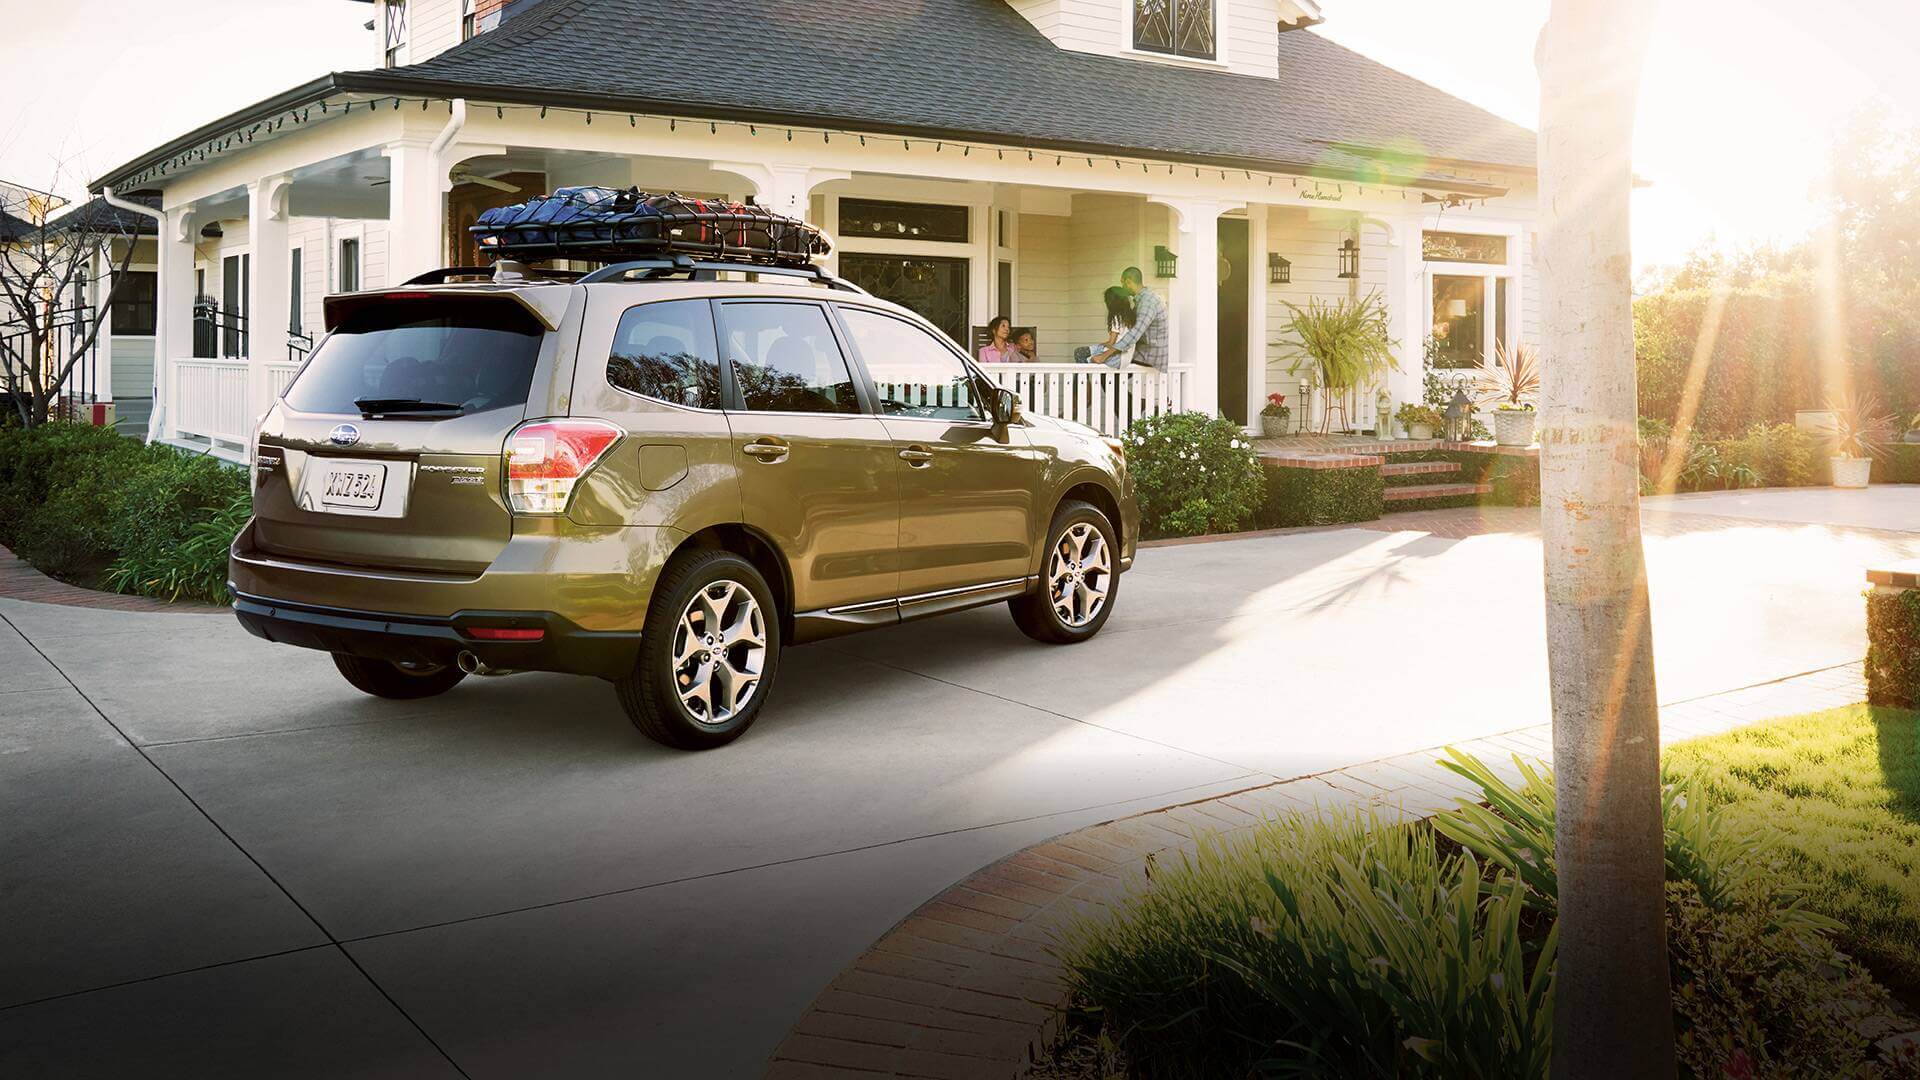 Which is the Best Roof Rack for Your Subaru Forester and Where Can It Take You? Best Car Top Carrier For Subaru Forester